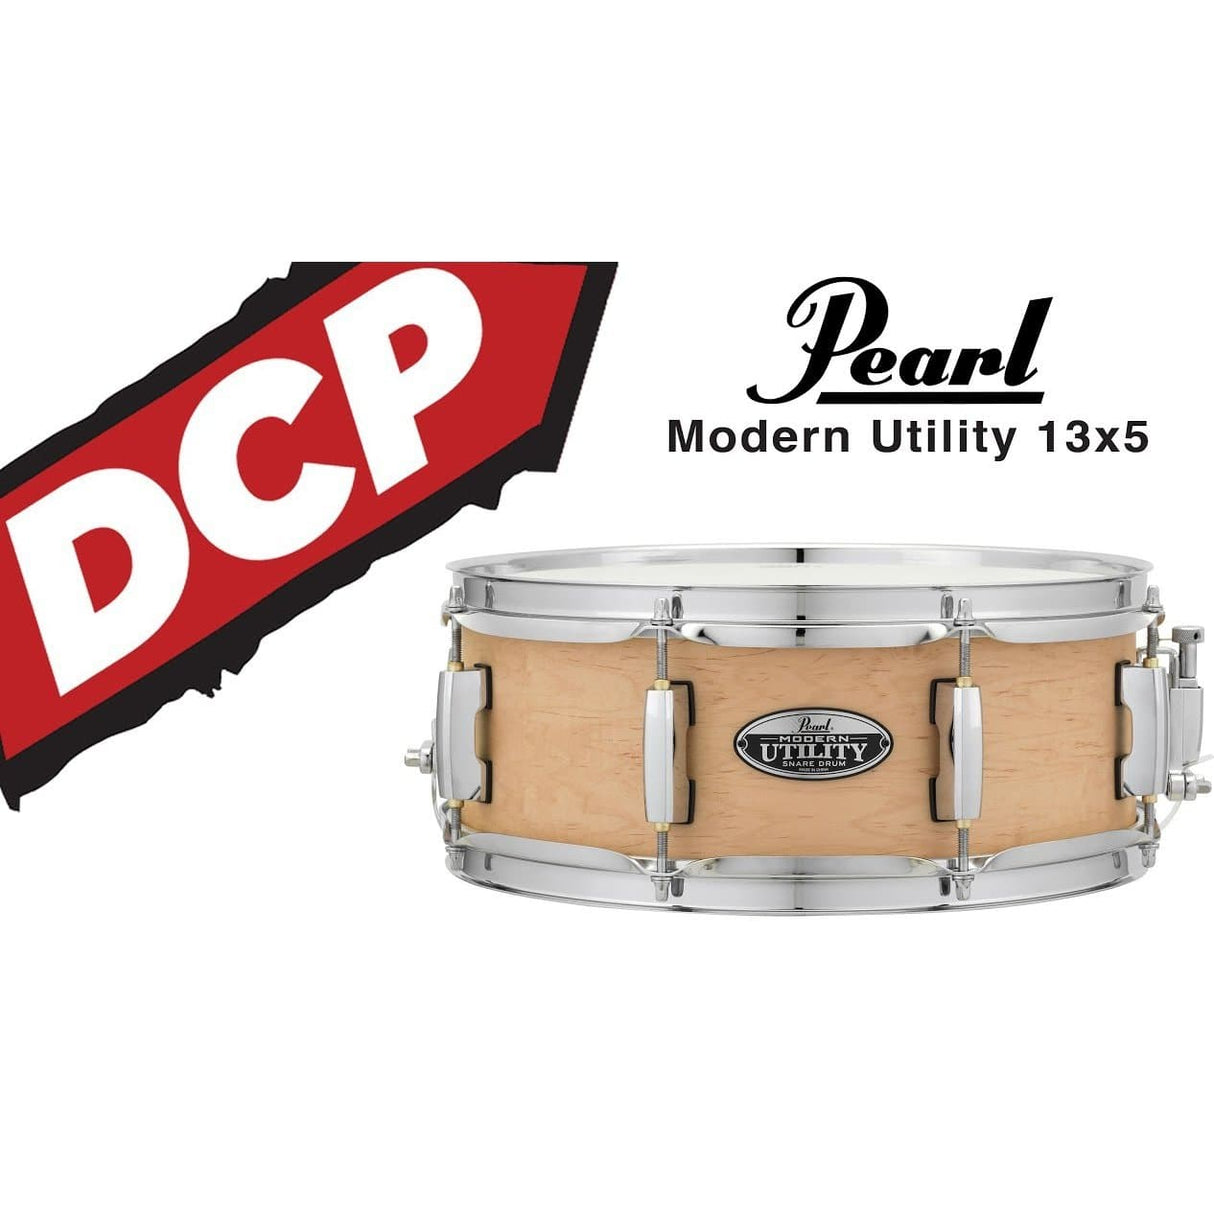 Pearl Modern Utility Maple Snare Drum 13x5 Matte Natural